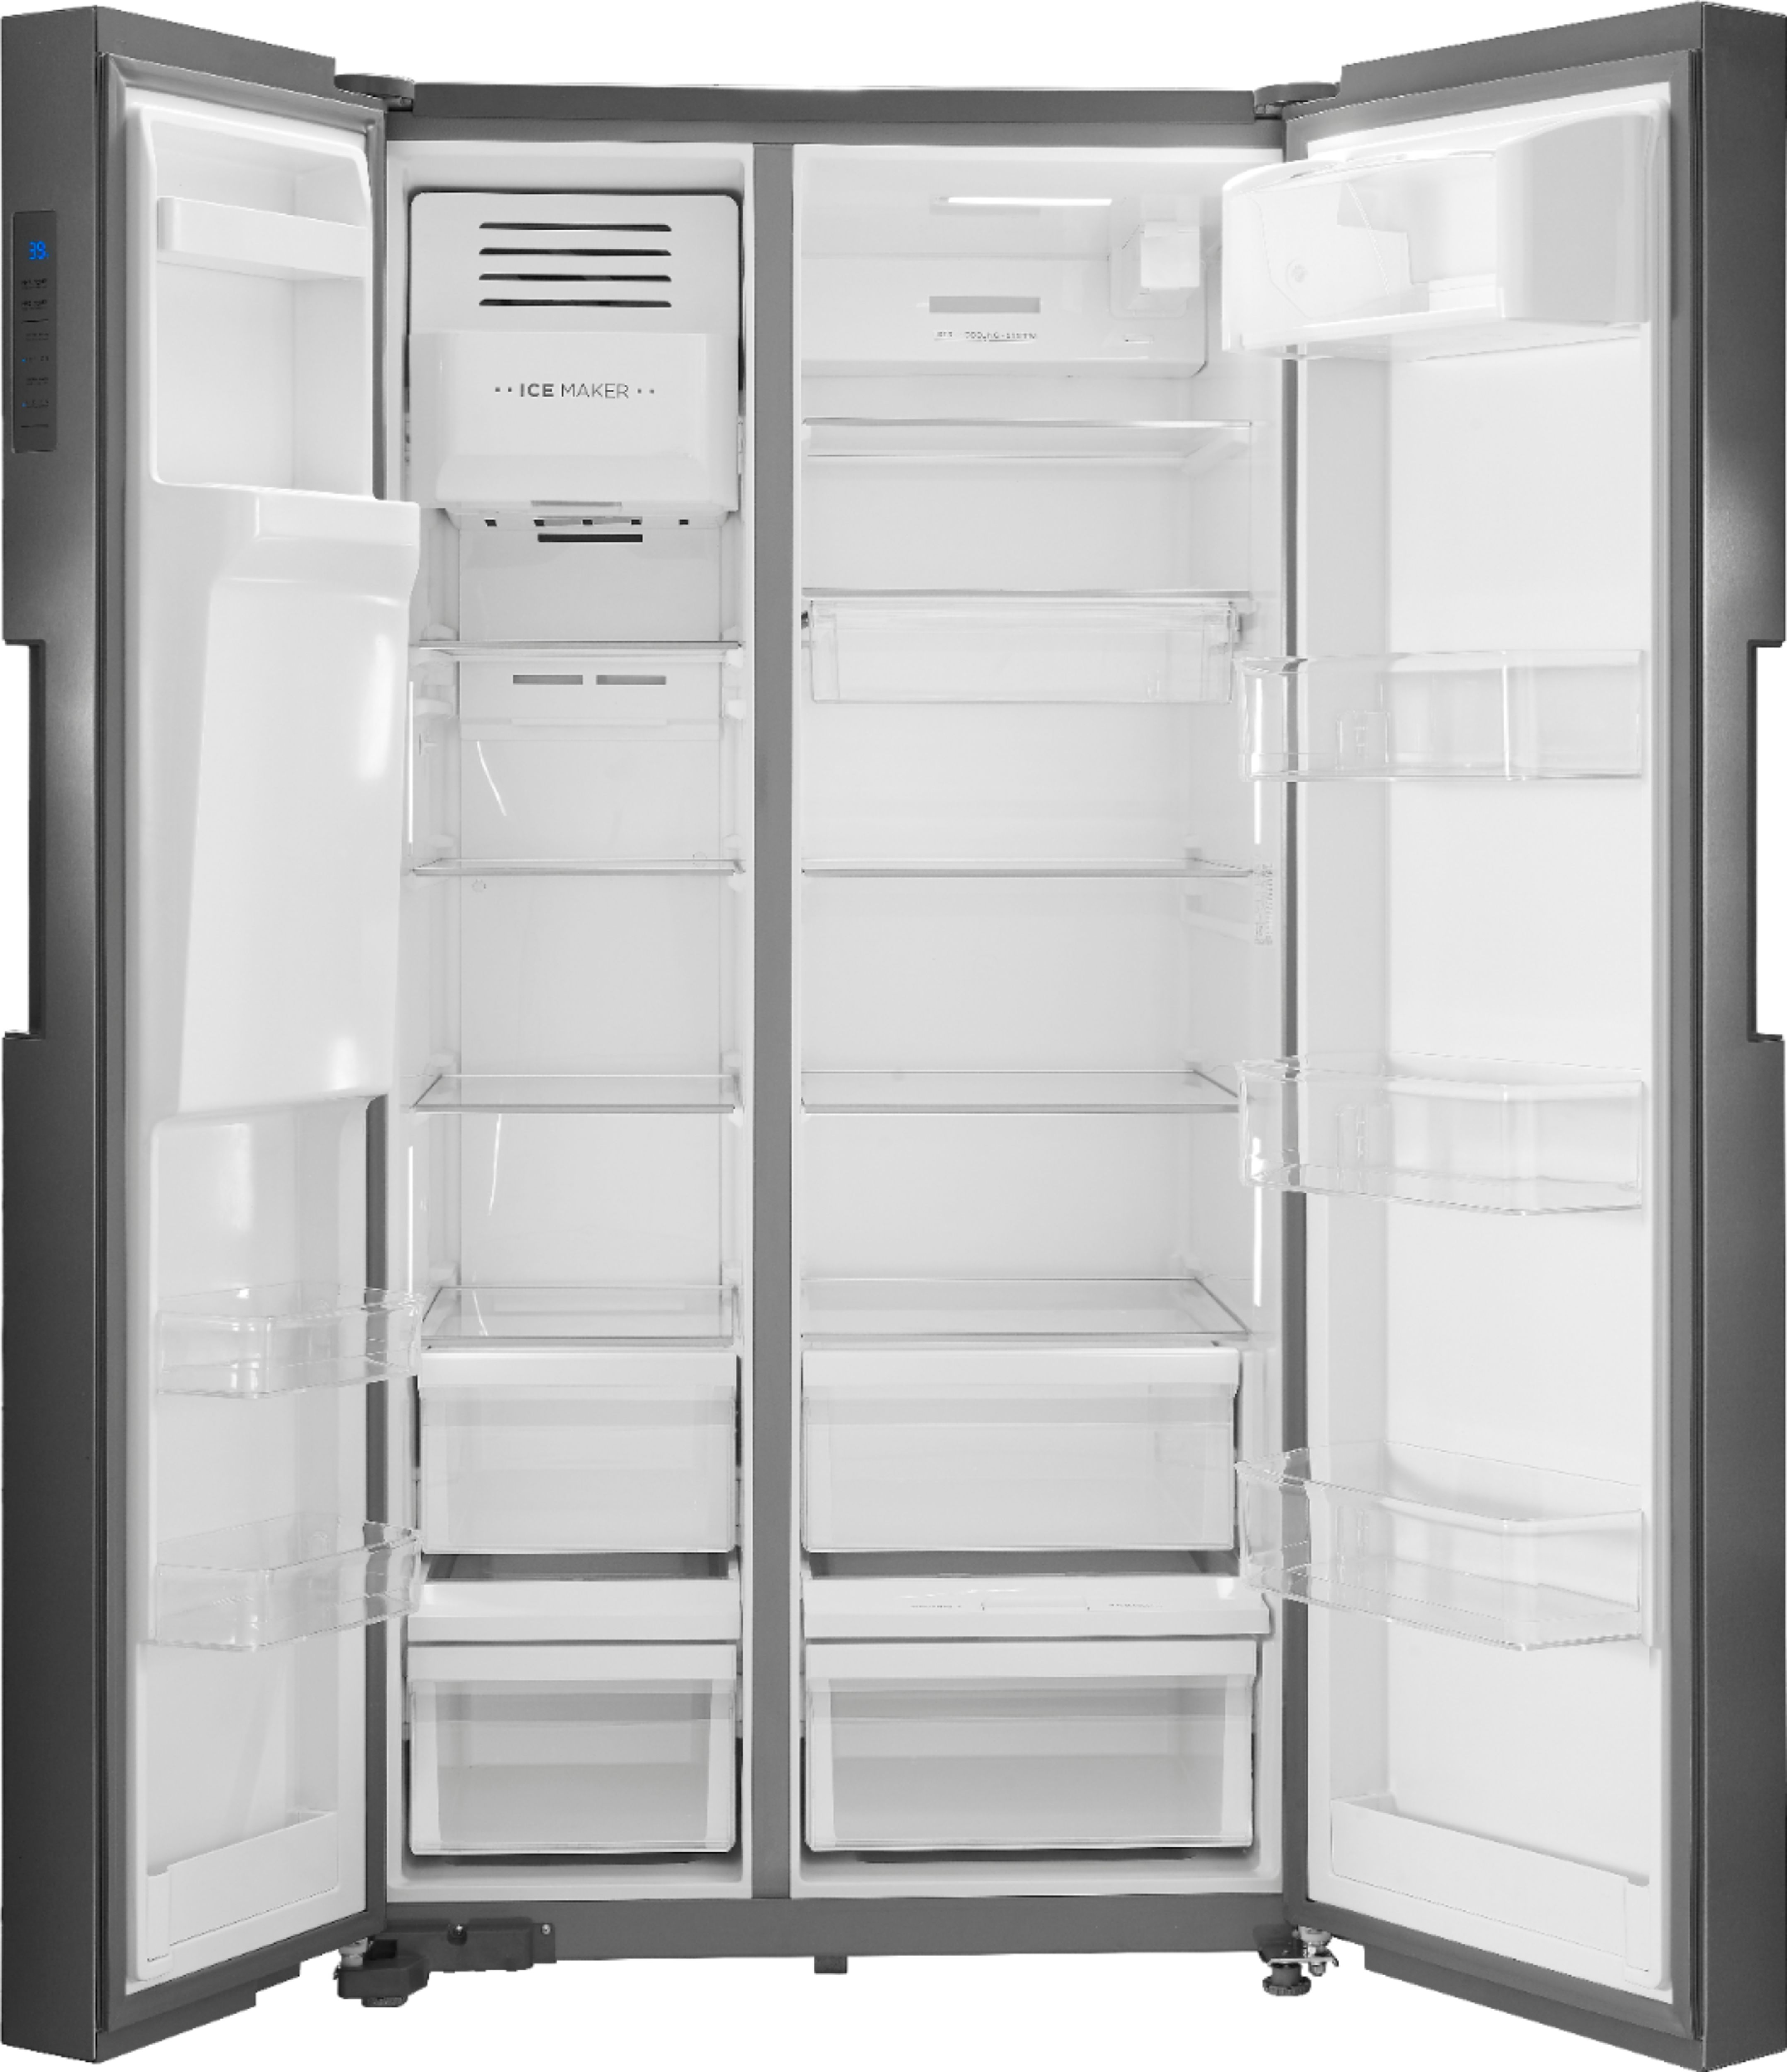 Insignia™ 26 516 Cu Ft Side By Side Refrigerator Stainless Steel Ns